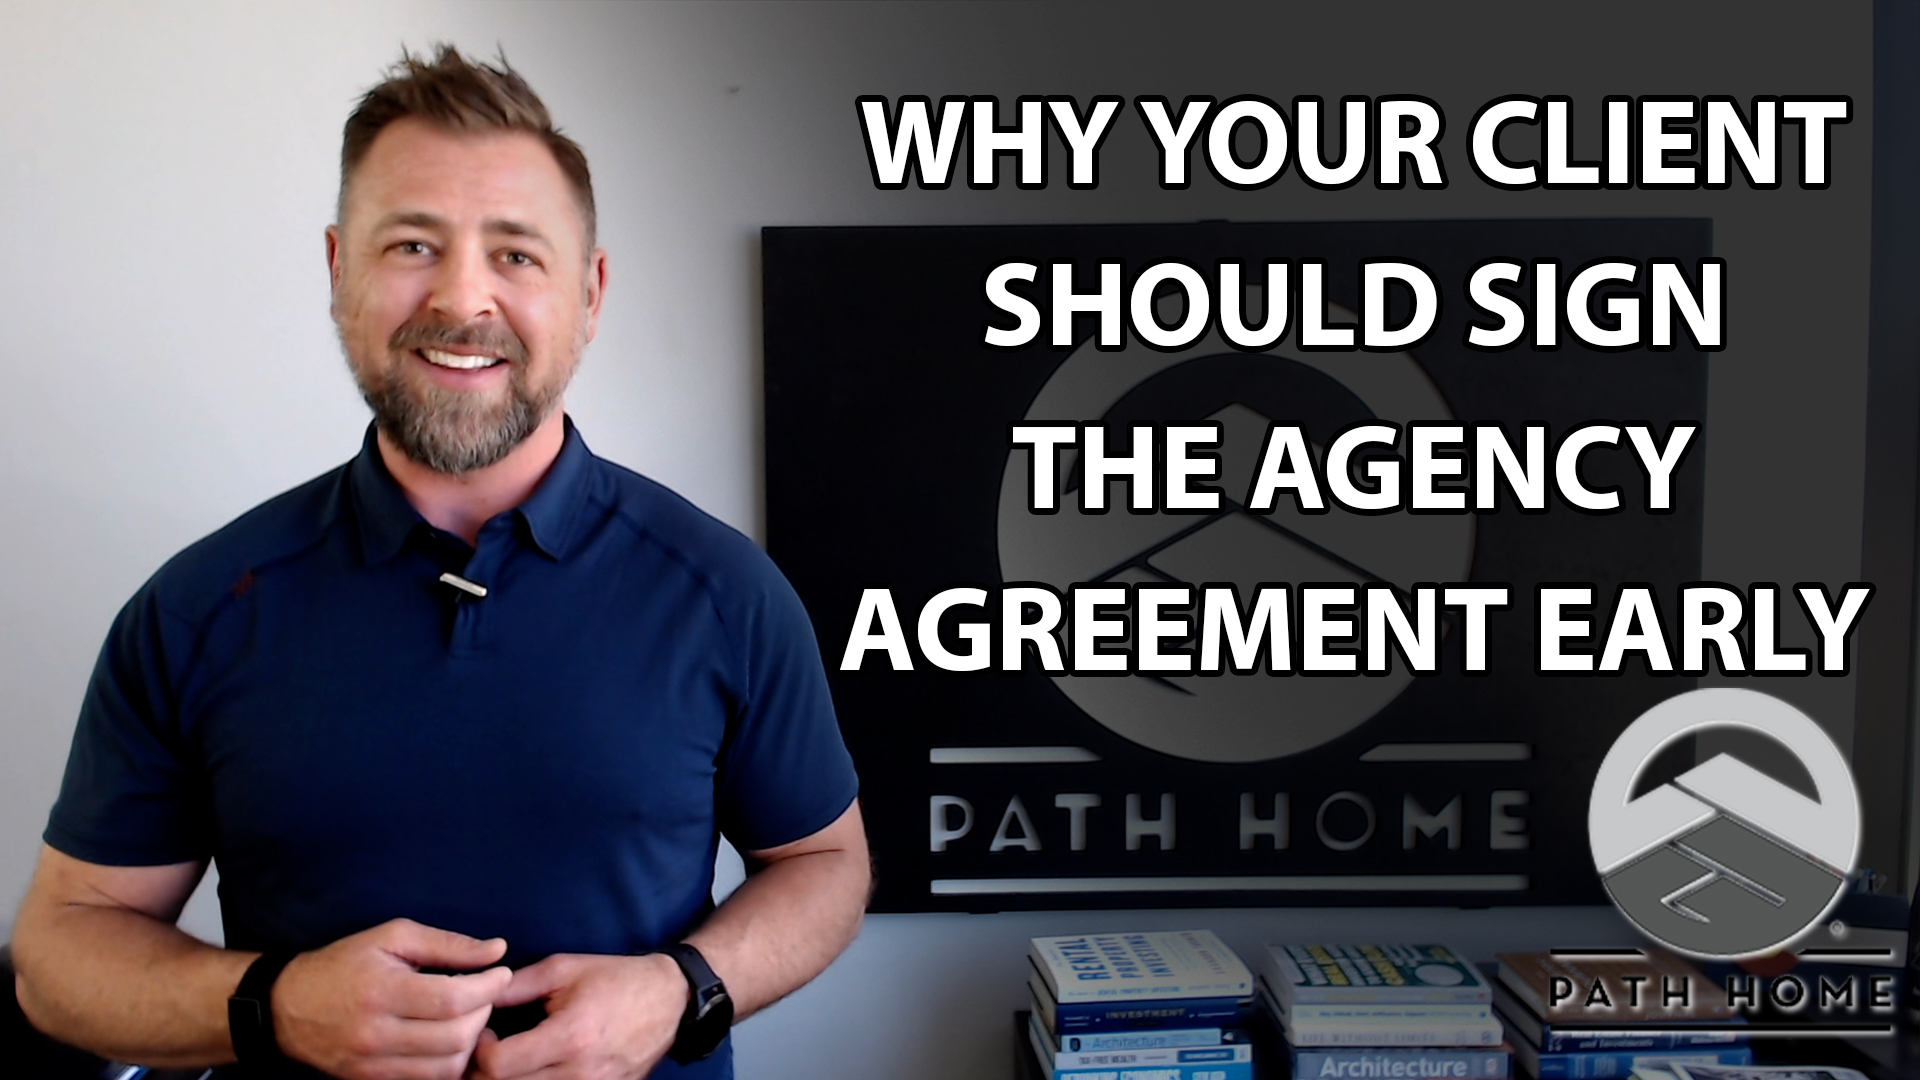 The Benefits of Getting the Agency Agreement Signed Early